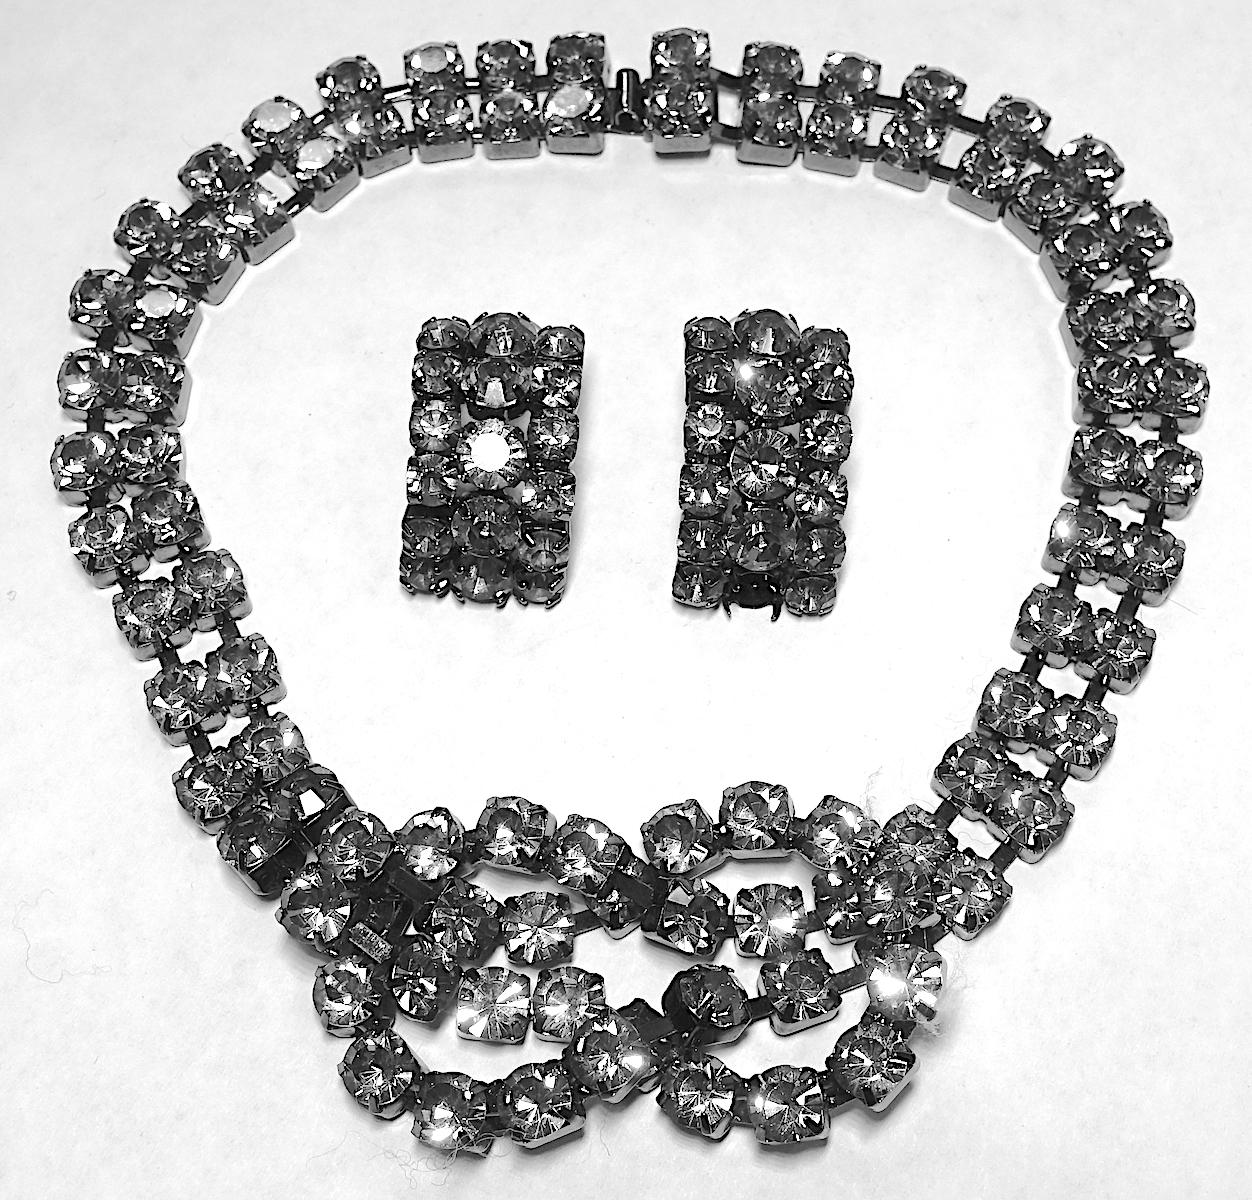 This stunning necklace and earring set is designed with smoky colored crystals with an encircled bow in the center. The necklace measures 17” and bow is 1-1/2” and is set with a Japanned finish.  The matching earrings are pierced and measure 1-1/4”